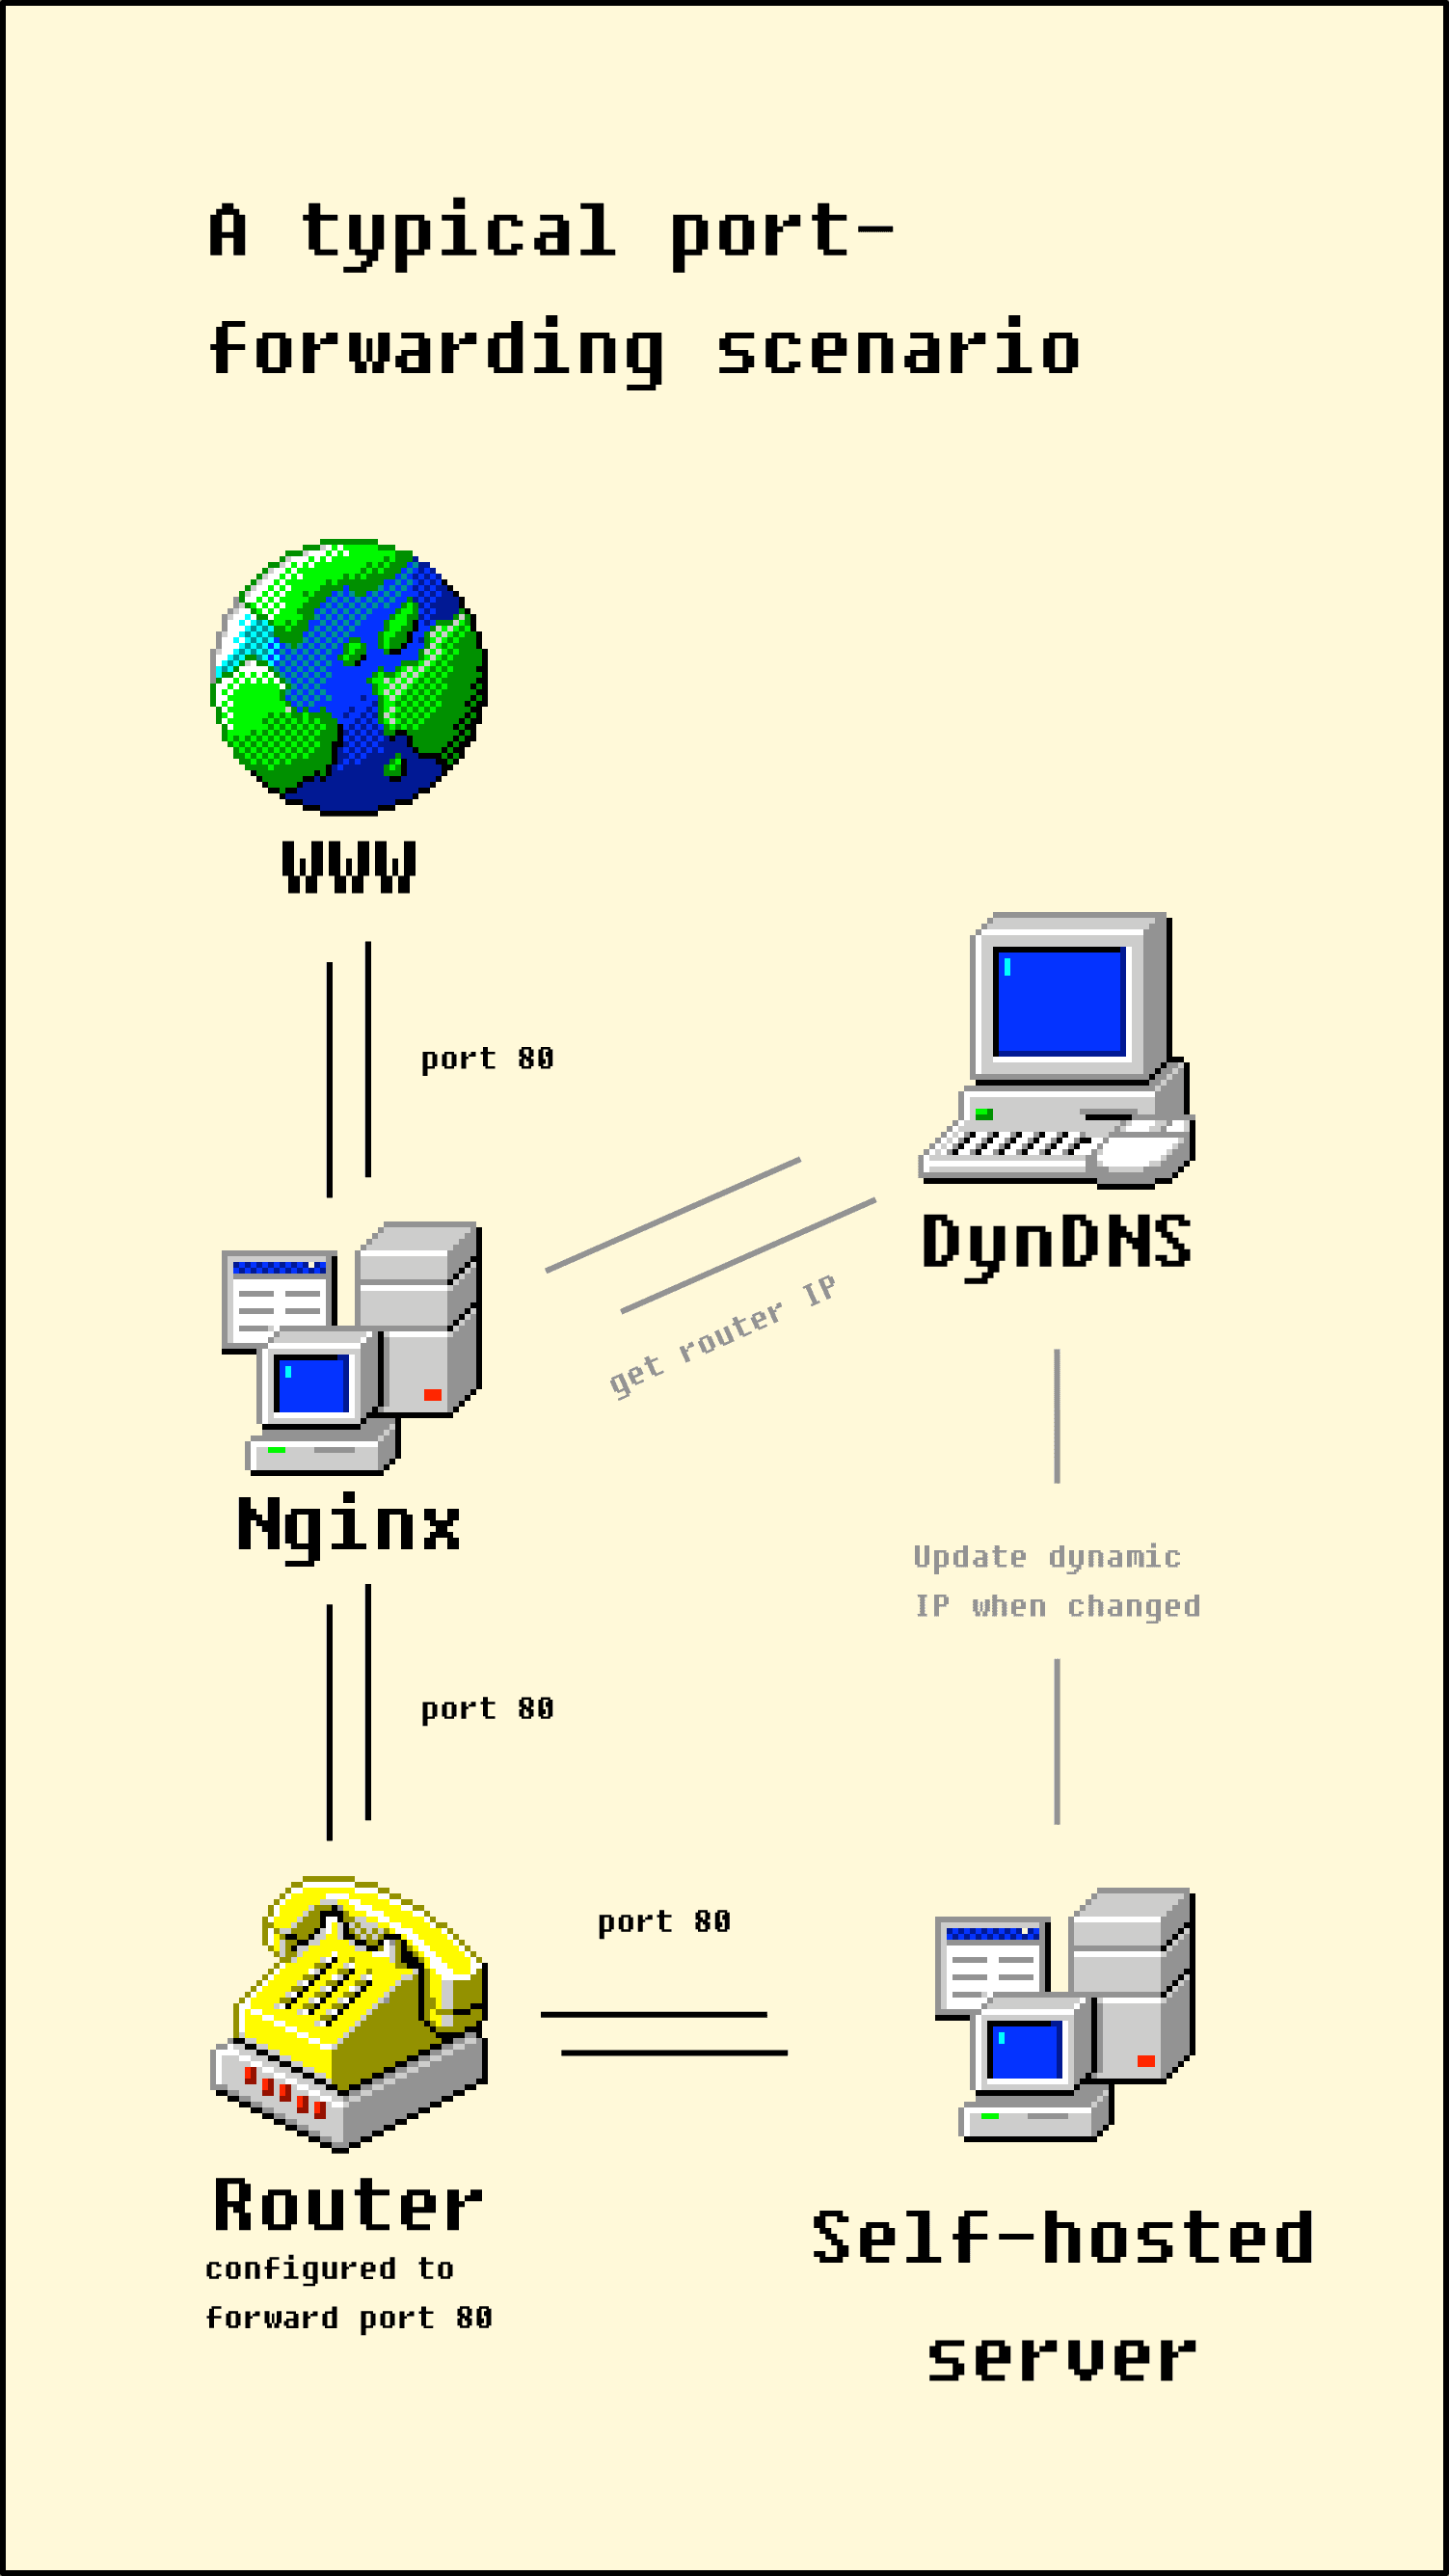 A traditional port forwarding scenario requires dyndns to upate the dynamic IP, as well as forwarding of ports through each device until it reaches the self-hosted server.